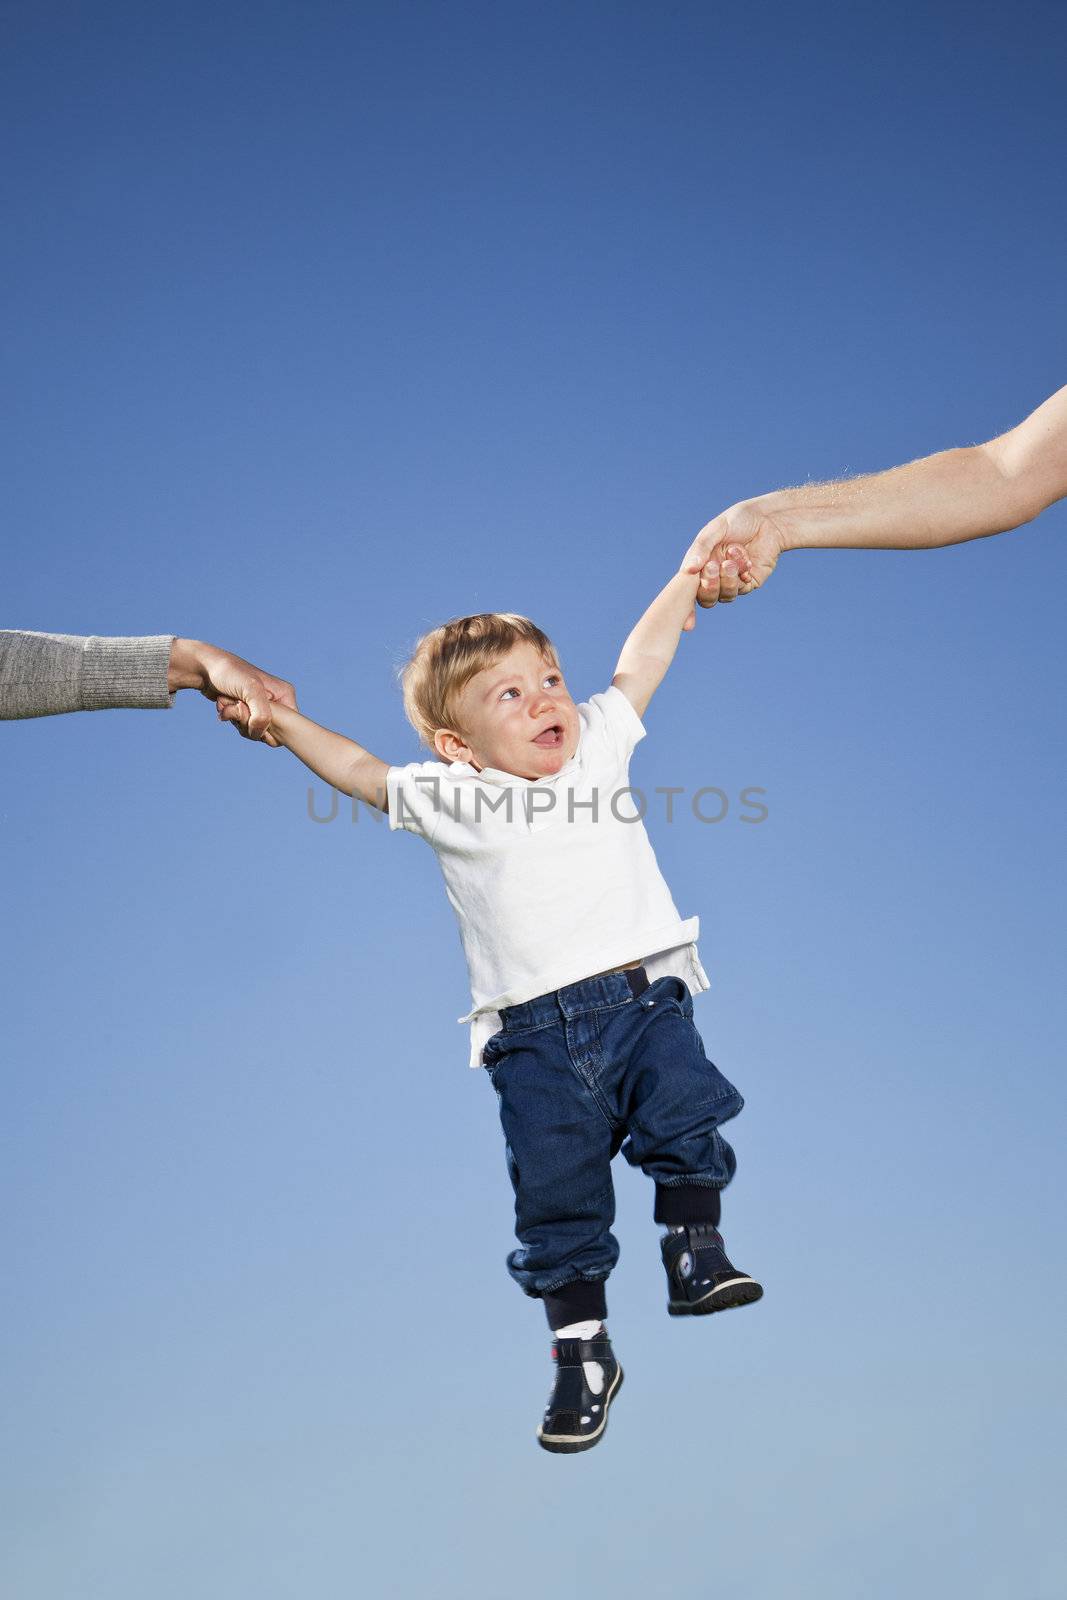 Child hanging in the air between parents hands